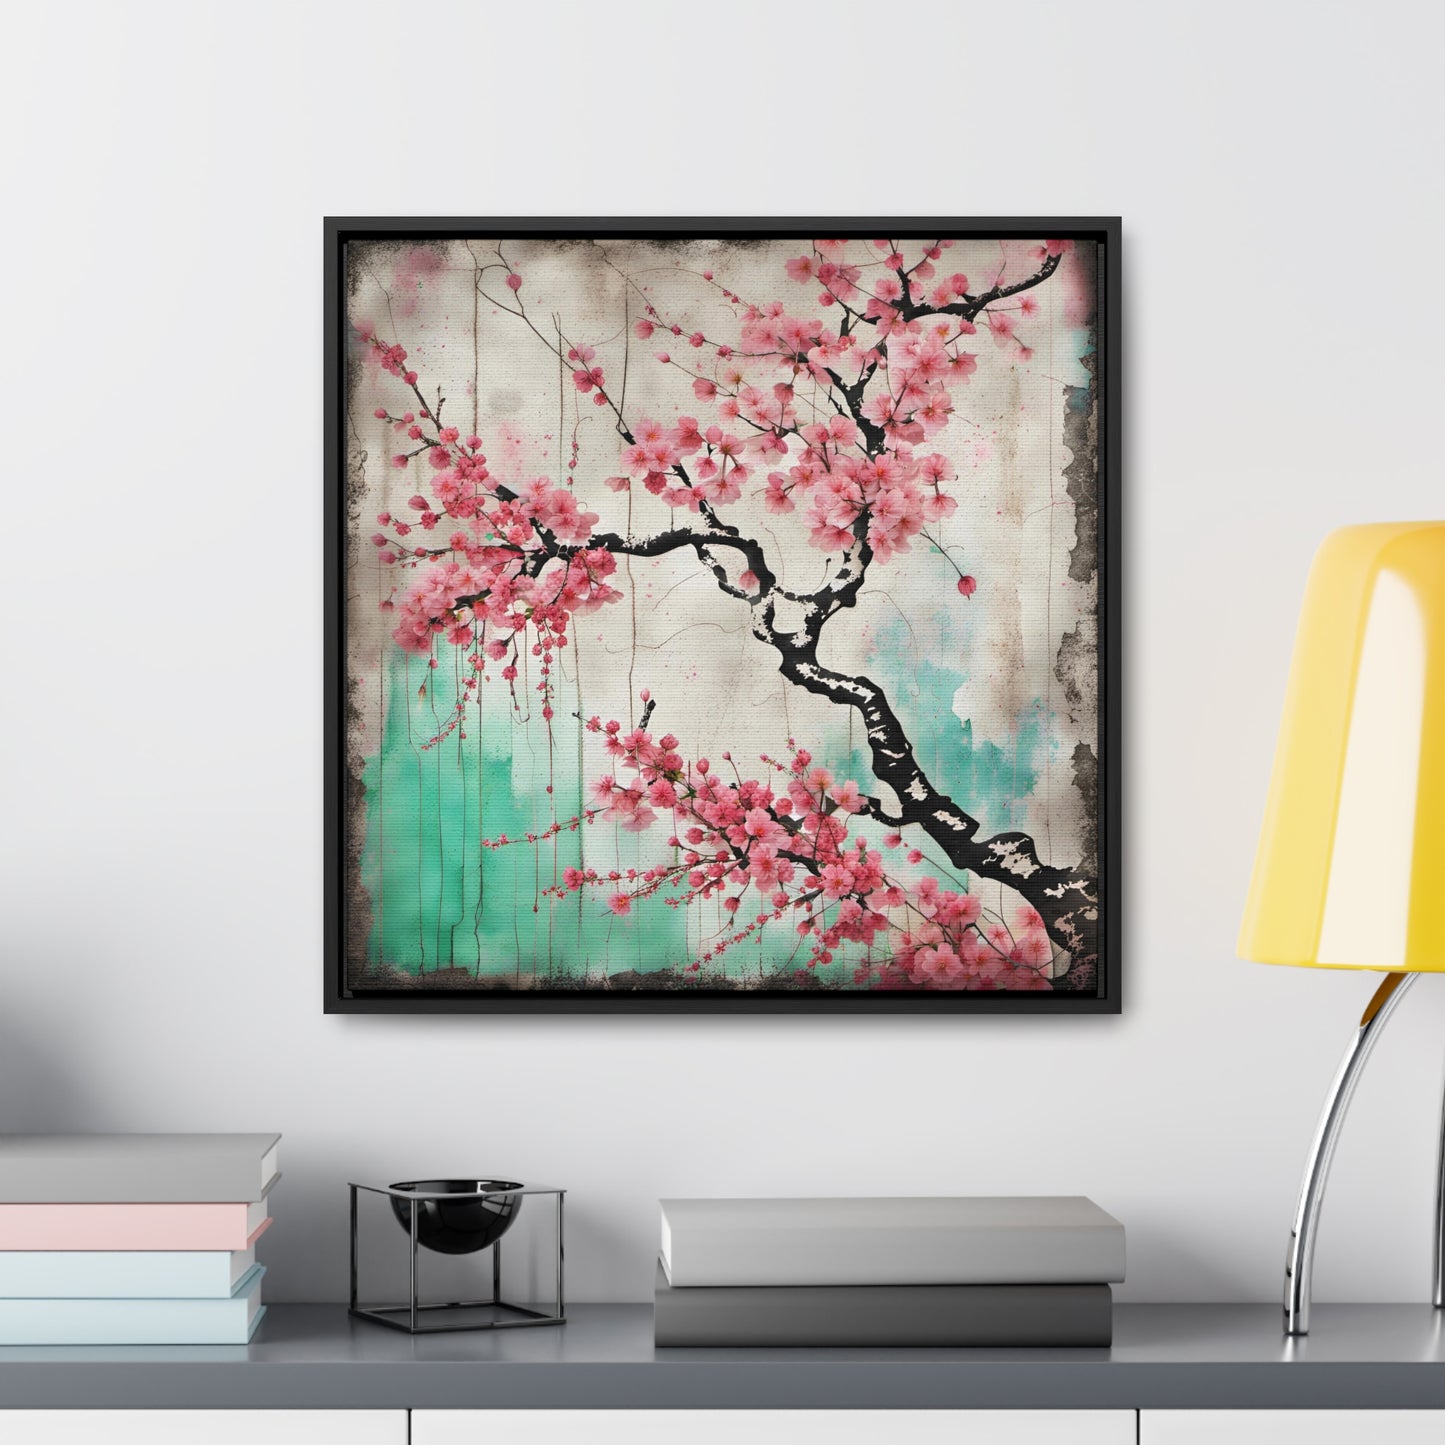 Cherry Blossoms Street Art Style Print on Canvas in a Floating Frame 20x20